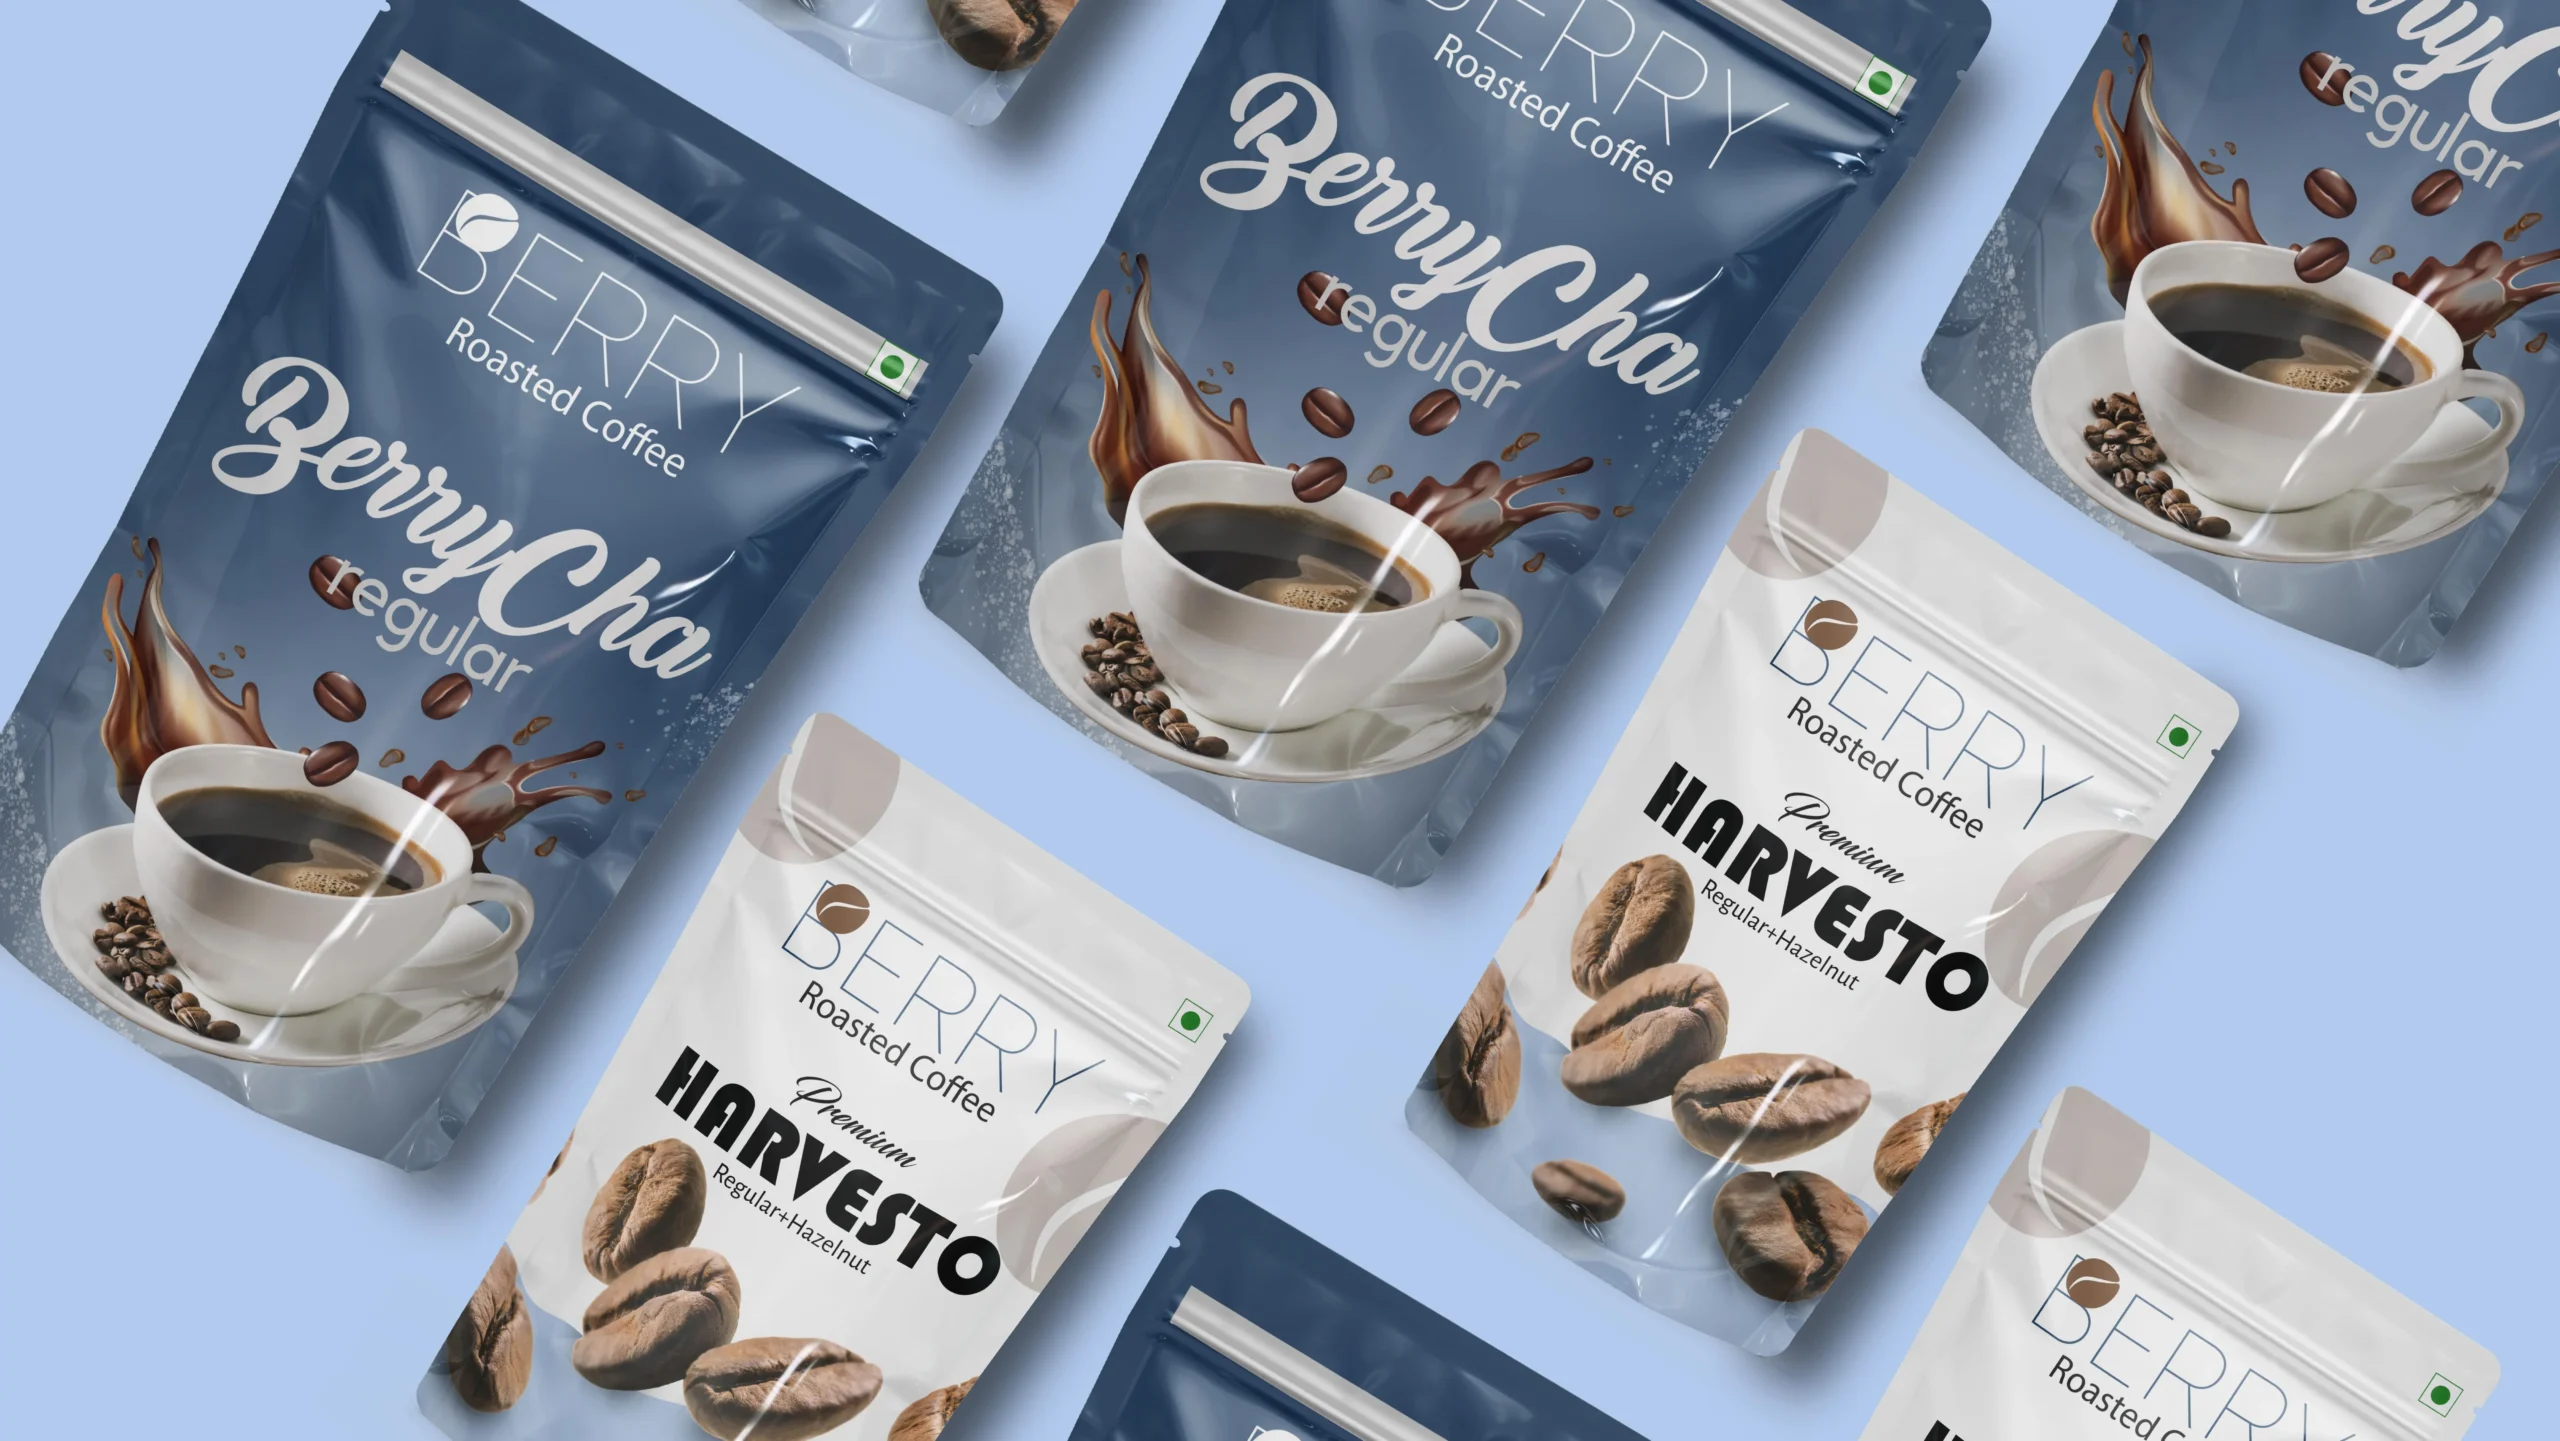 Array of Berry coffee products, highlighting different blends and flavors